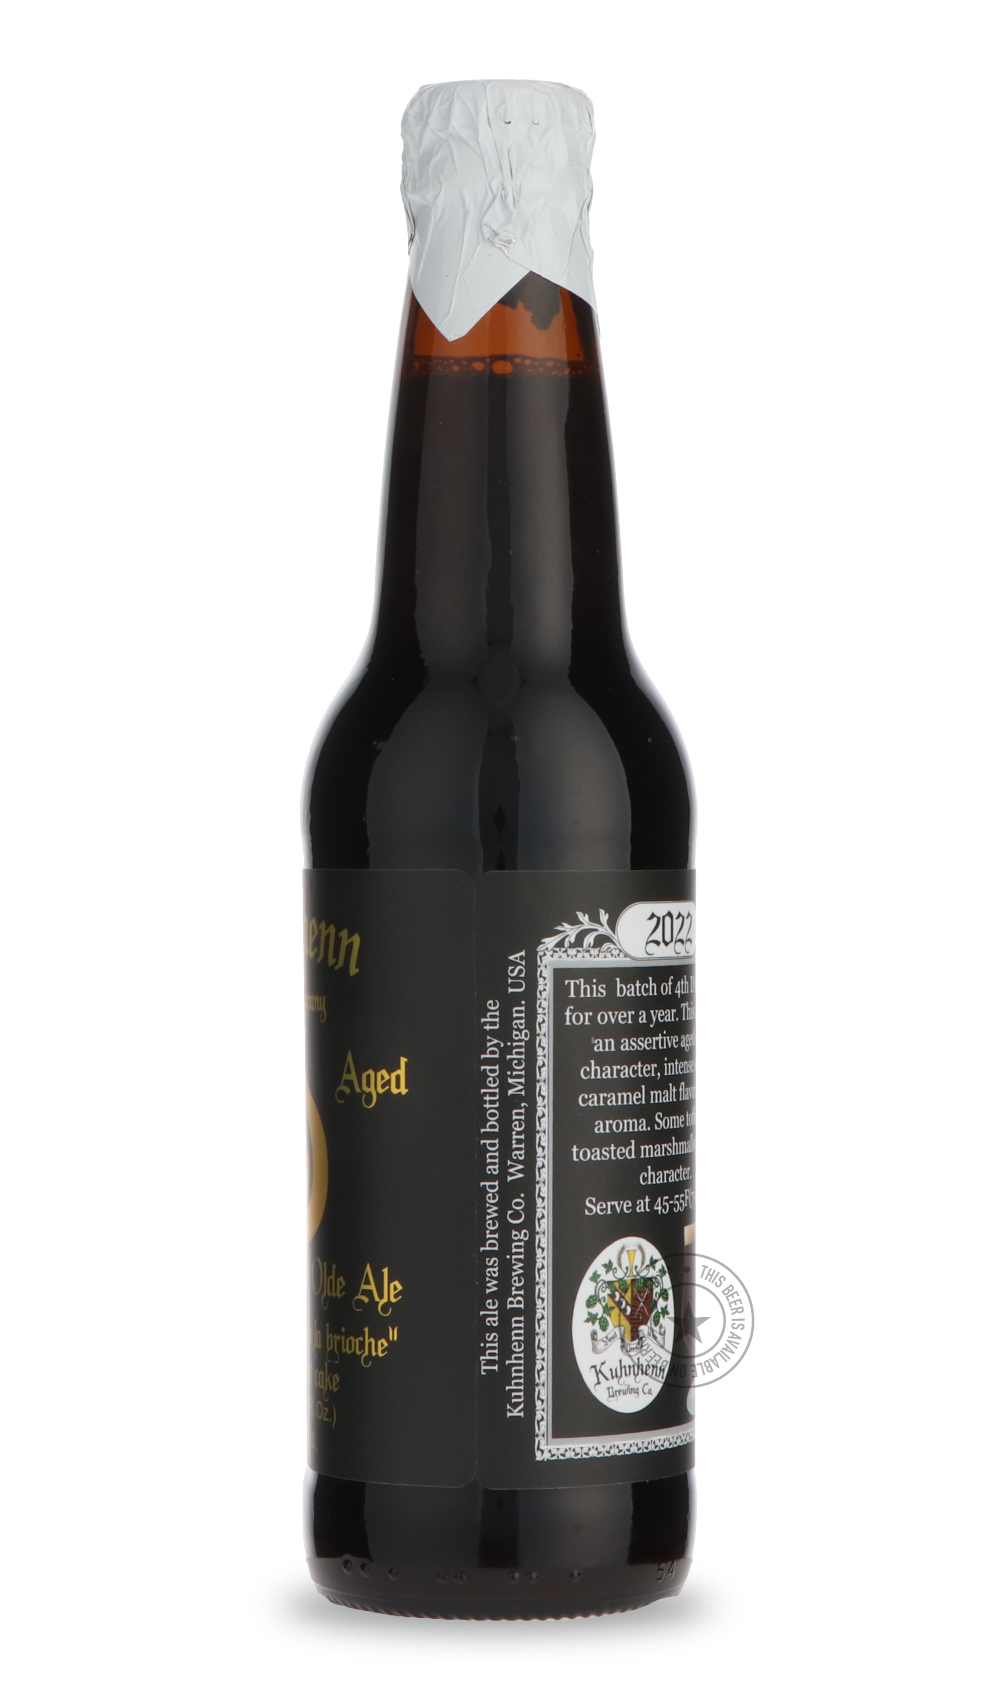 -Kuhnhenn- Bourbon Barrel Aged 4D Let Them Eat Cake-Brown & Dark- Only @ Beer Republic - The best online beer store for American & Canadian craft beer - Buy beer online from the USA and Canada - Bier online kopen - Amerikaans bier kopen - Craft beer store - Craft beer kopen - Amerikanisch bier kaufen - Bier online kaufen - Acheter biere online - IPA - Stout - Porter - New England IPA - Hazy IPA - Imperial Stout - Barrel Aged - Barrel Aged Imperial Stout - Brown - Dark beer - Blond - Blonde - Pilsner - Lager